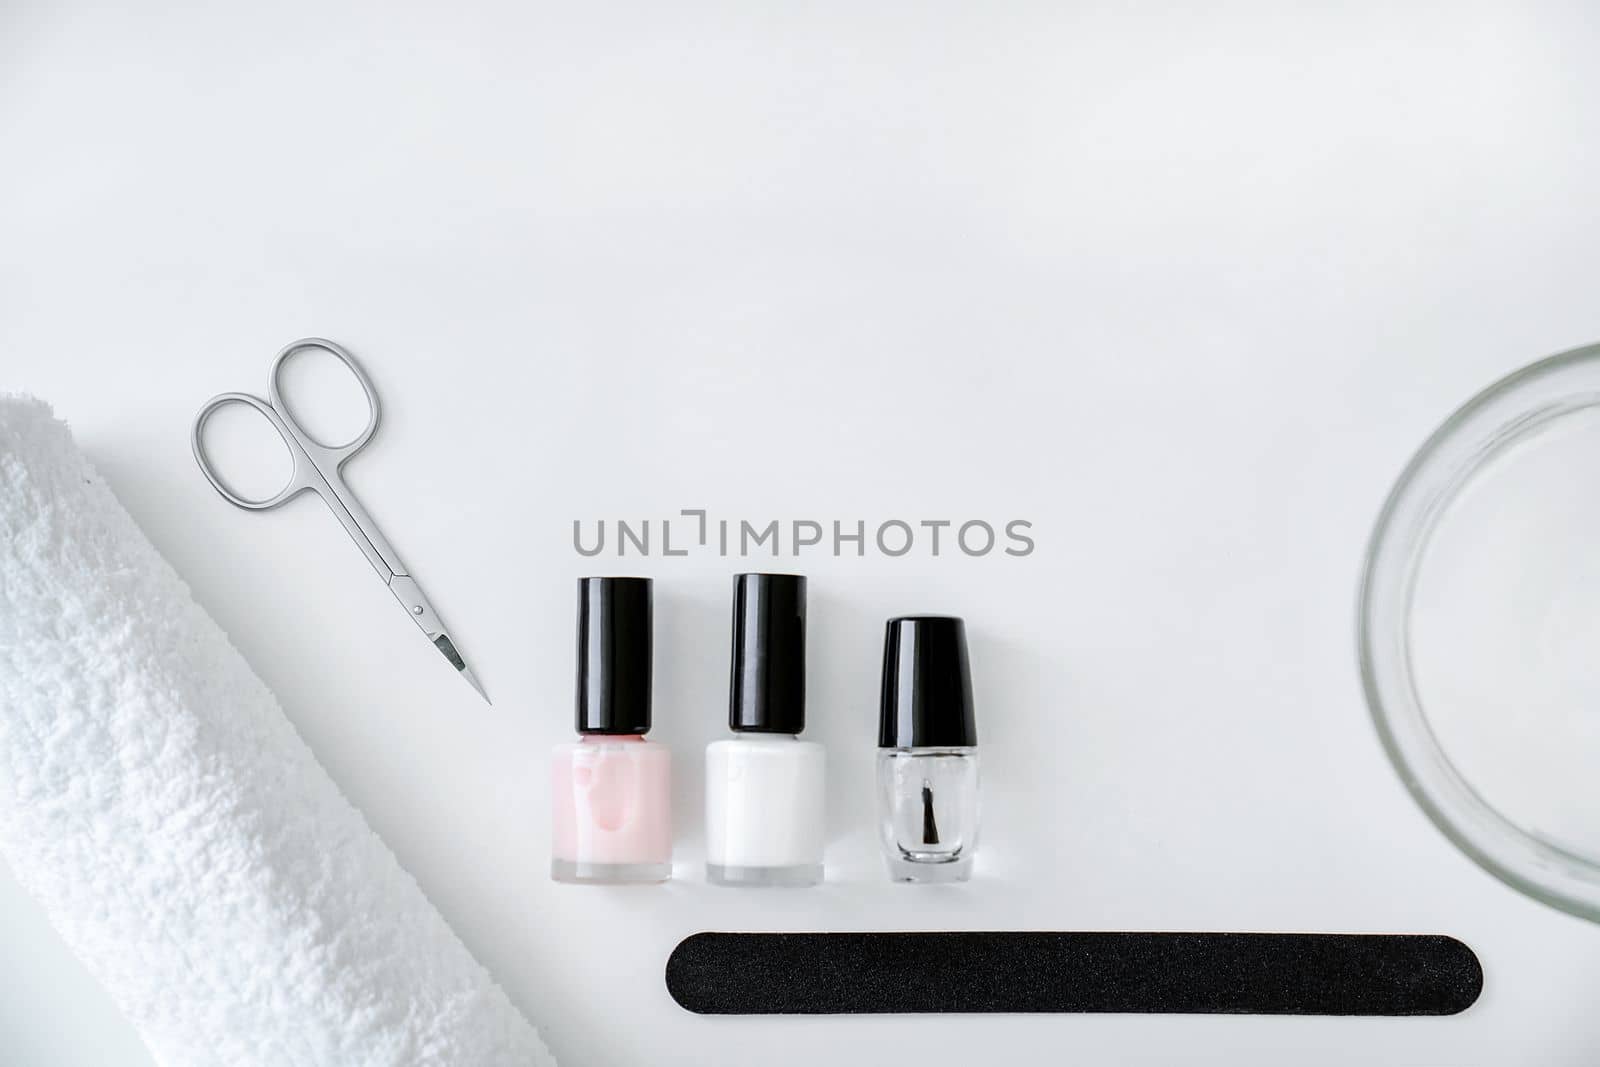 Set of accessories for manicure and hand care on white background, flat lay, top view, copy space